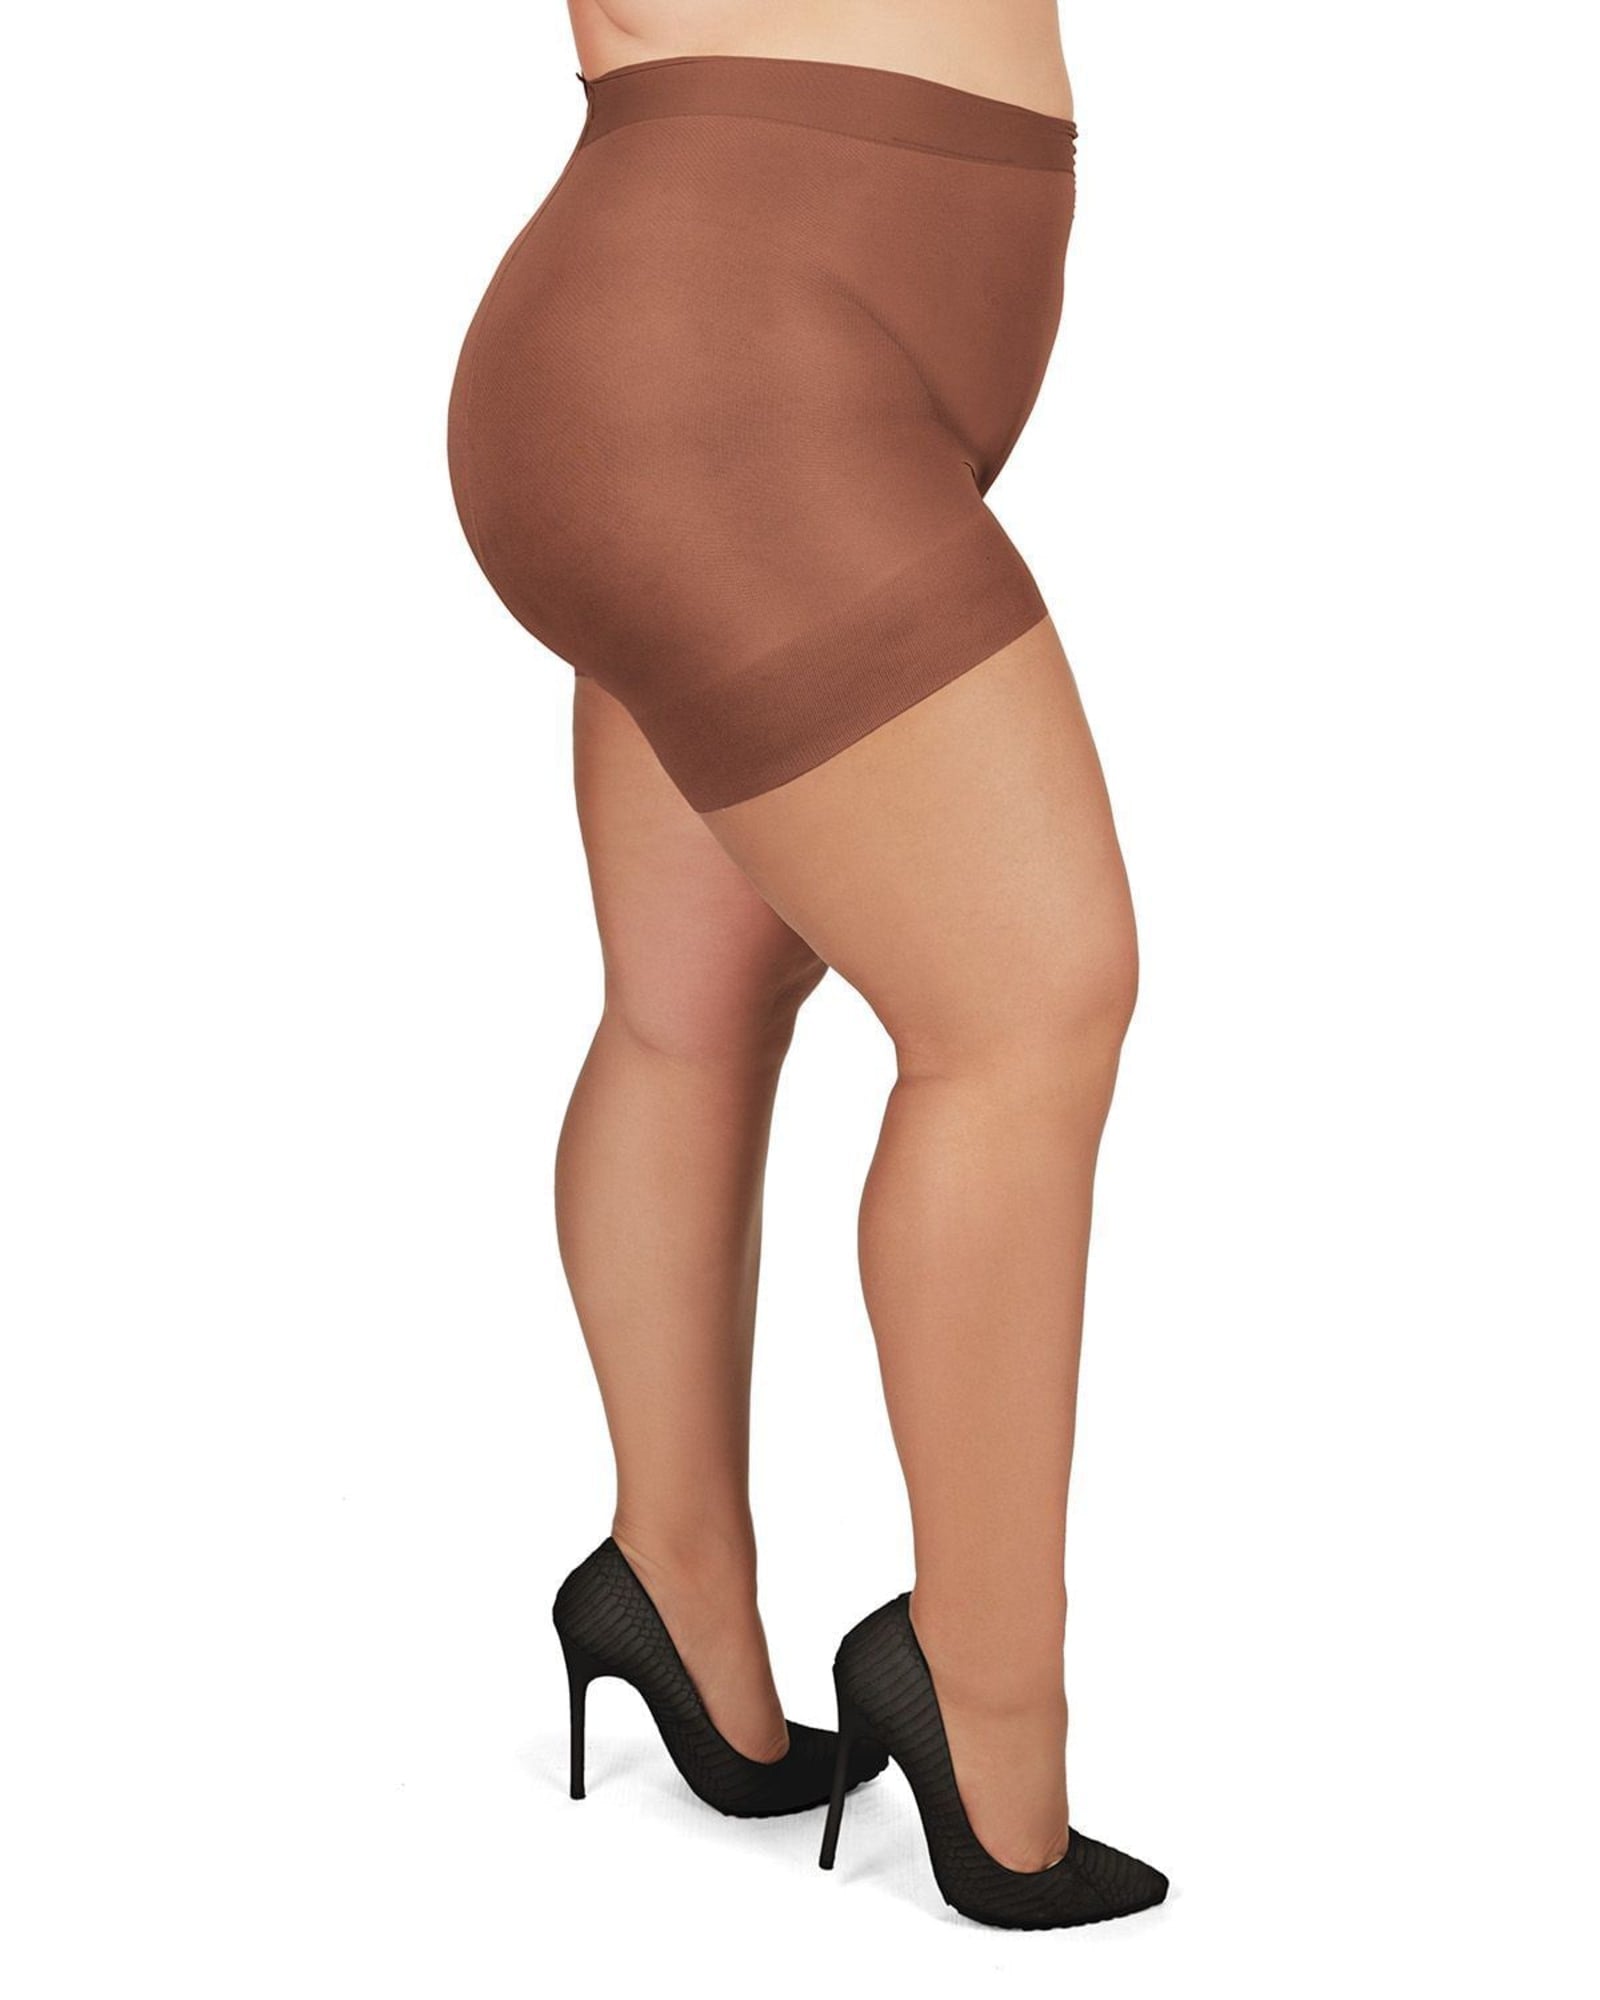 Plus Size Curvy Ultra Sheer Control Top Pantyhose | French Coffee